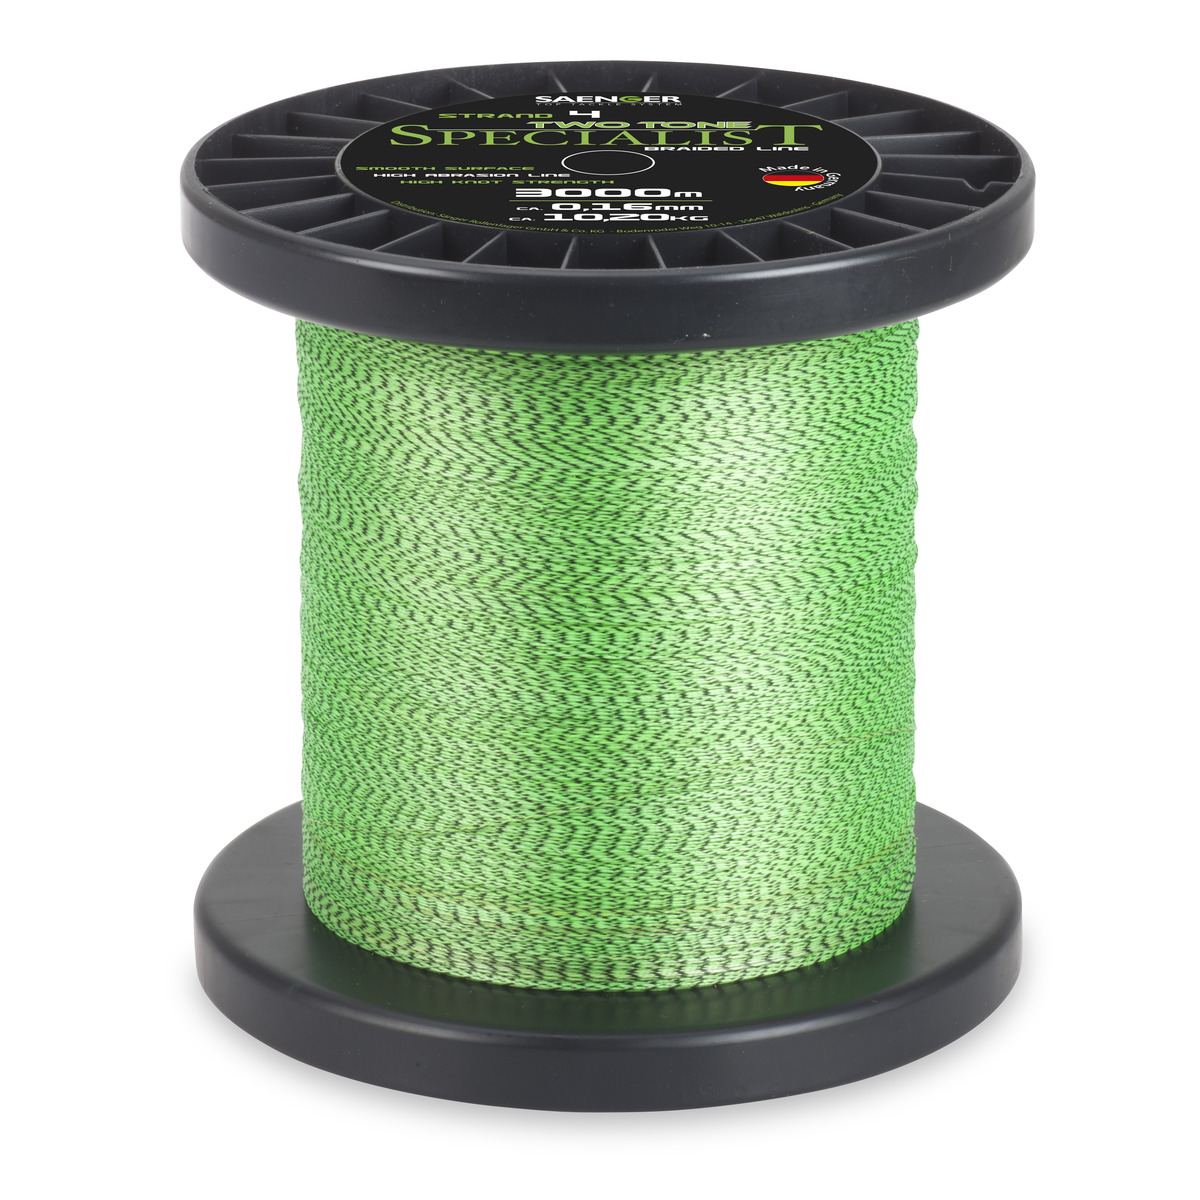 Saenger Specialist Two Tone Fluo Braid - 0,16 mm - 10,2kg 3000 m